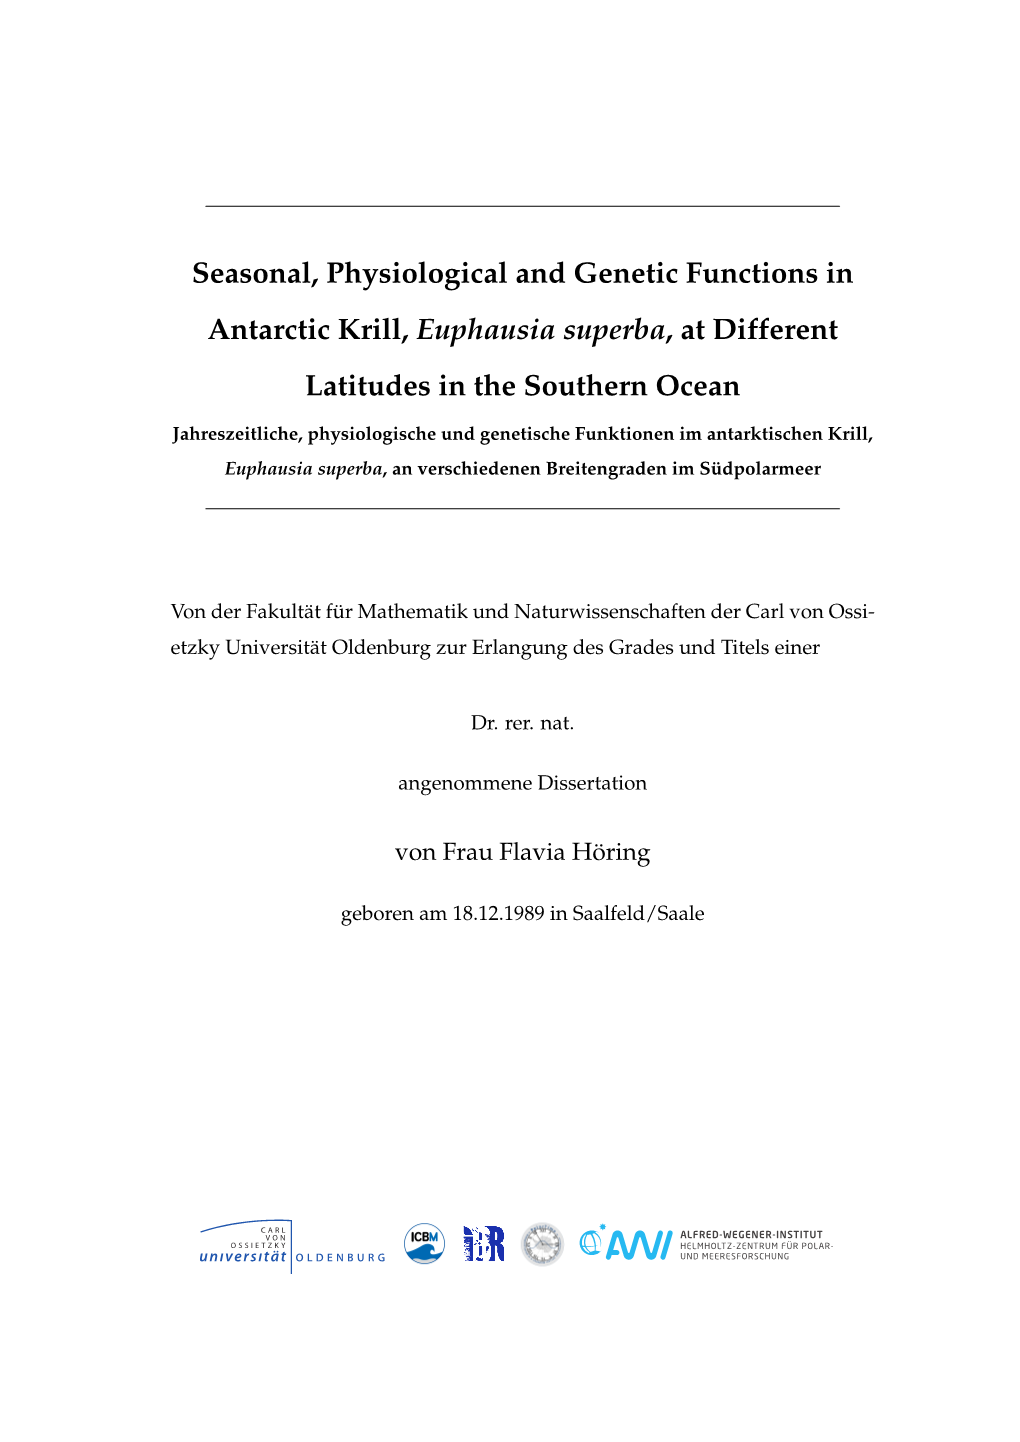 Seasonal, Physiological and Genetic Functions in Antarctic Krill, Euphausia Superba, at Different Latitudes in the Southern Ocean